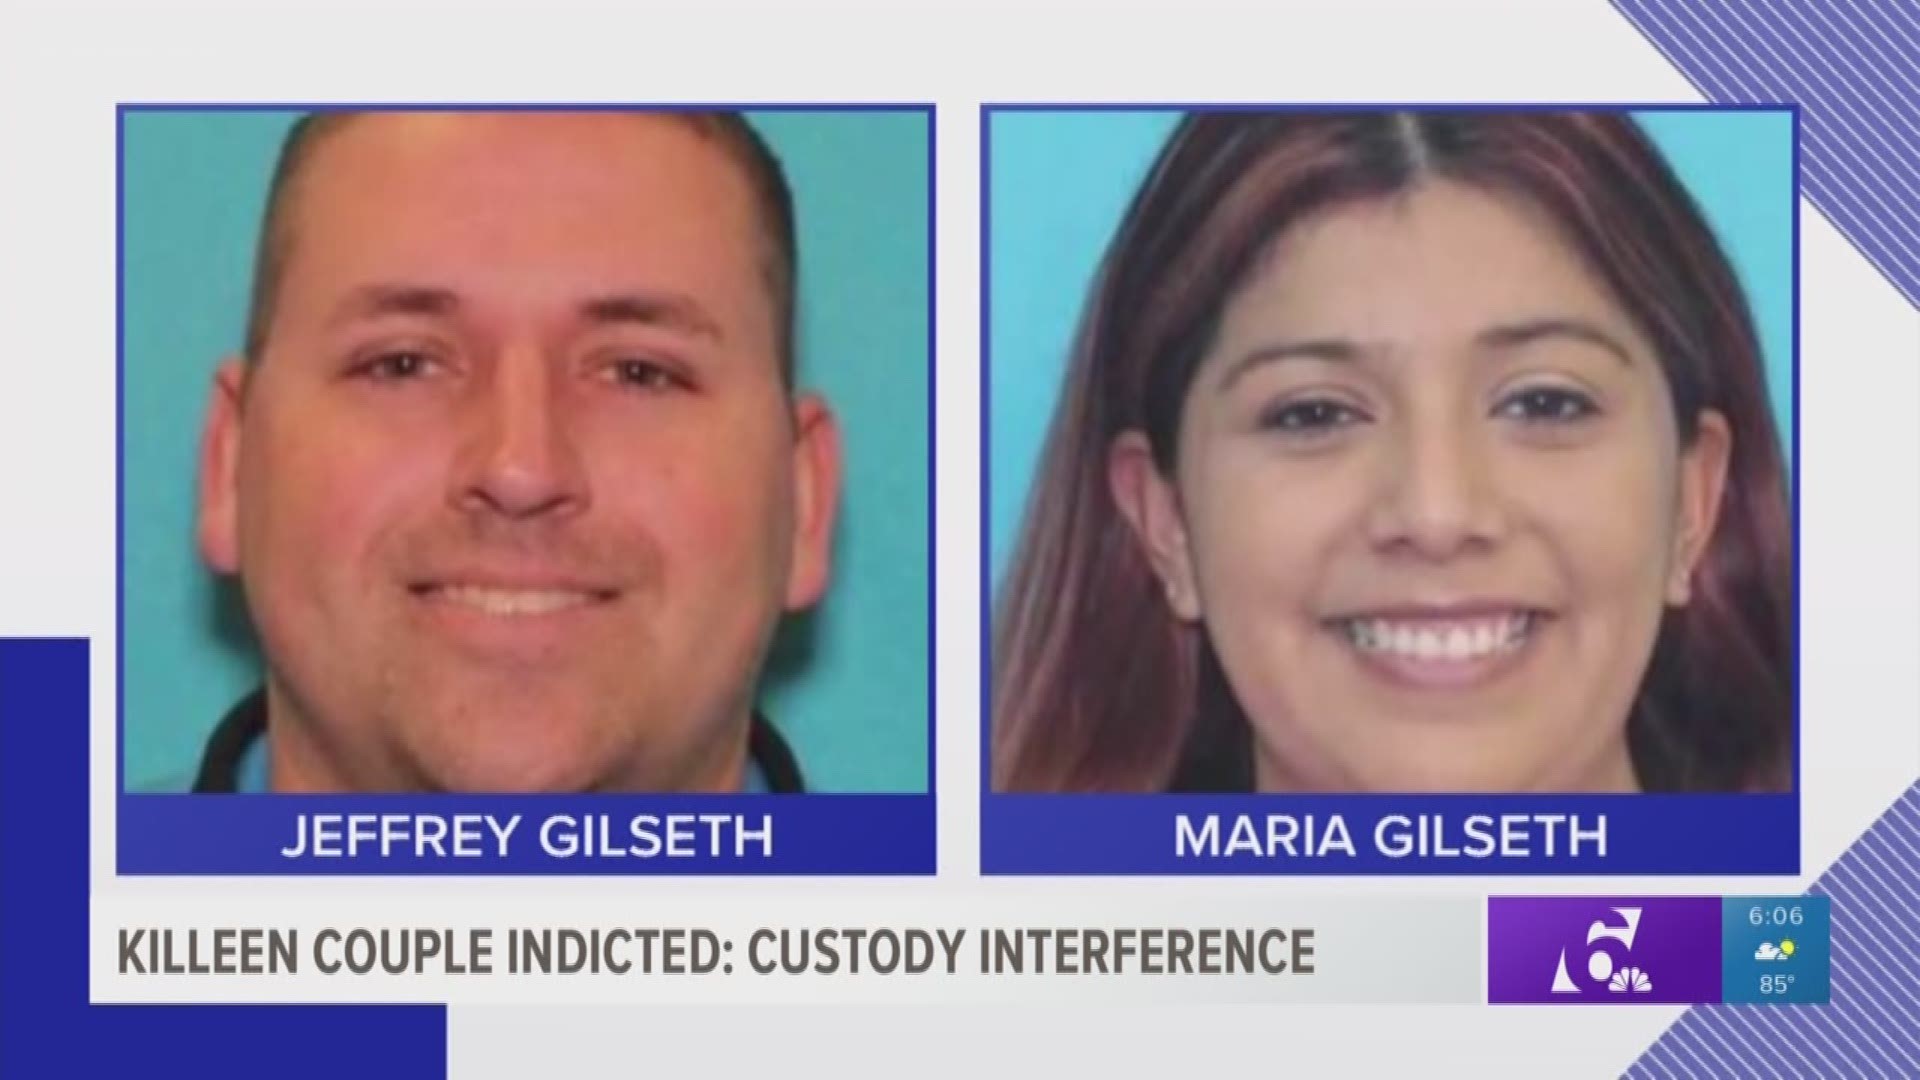 Jeffrey and Maria Gilseth were formally charged for custody interference. The couple is accused of taking their three children during a supervised visit after they lost custody.